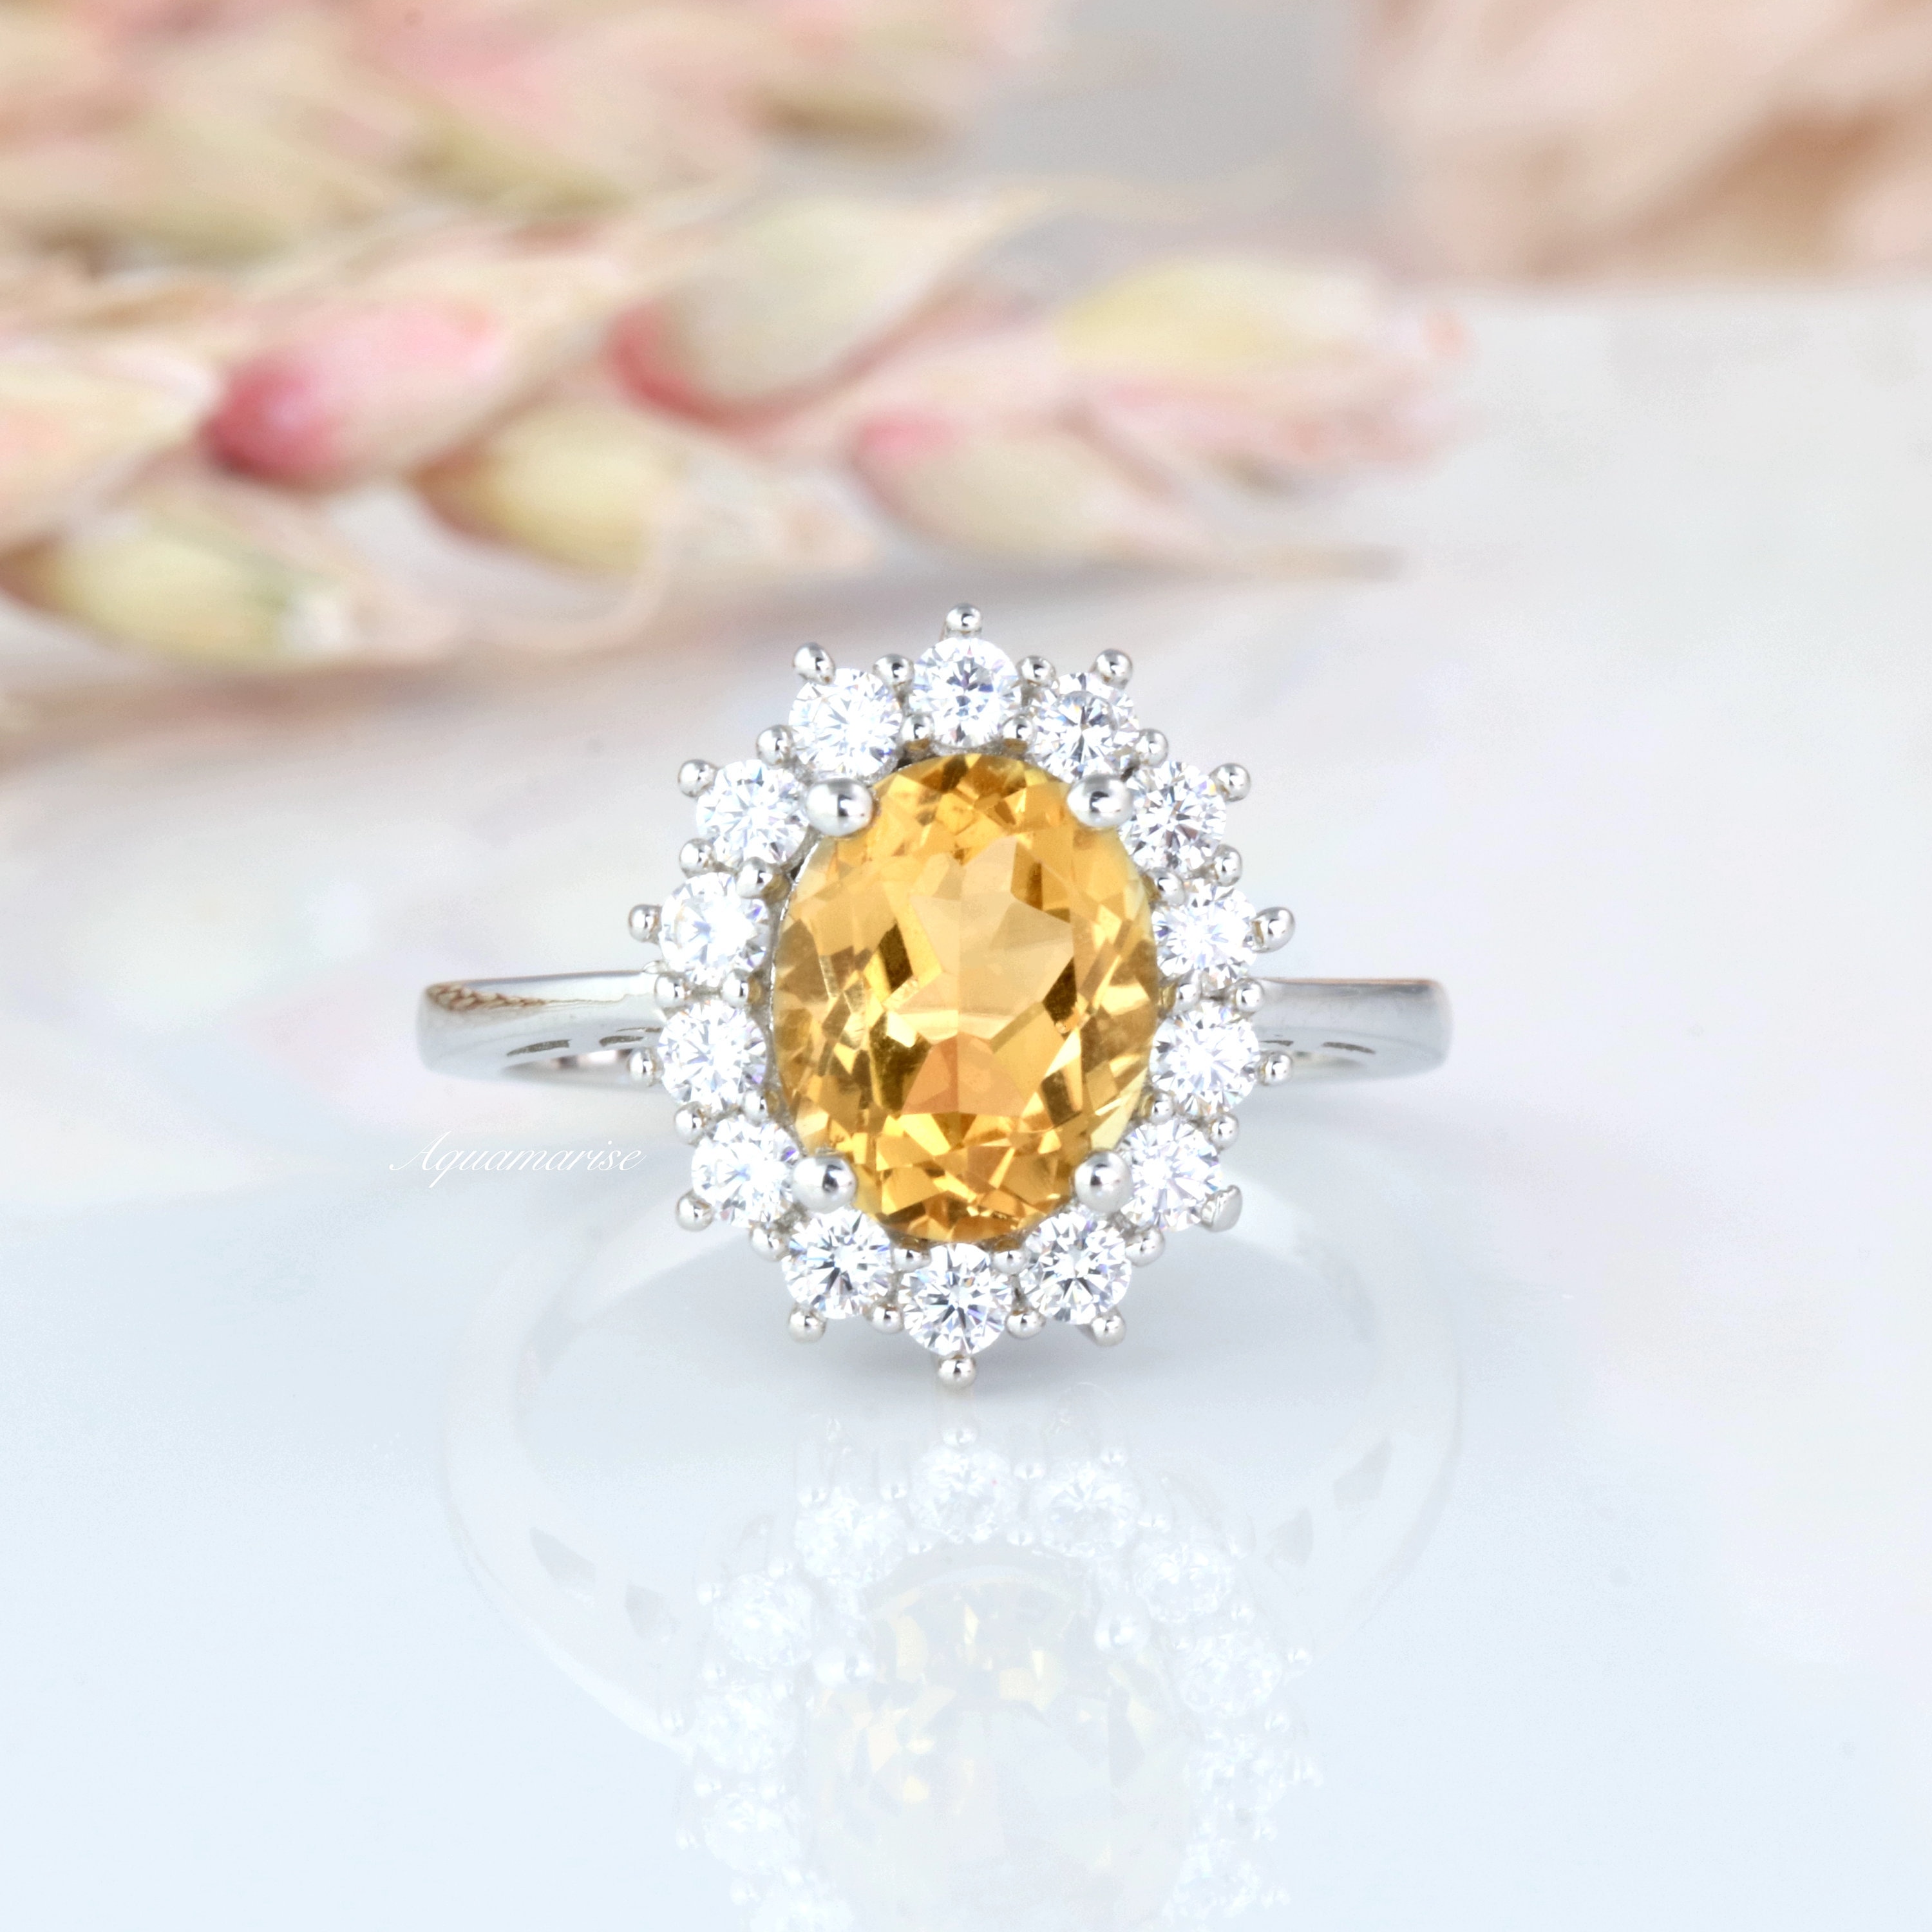 NATURAL CITRINE 925 STERLING SILVER STATEMENT WEDDING GIFT FOR HER WOMEN'S RING 